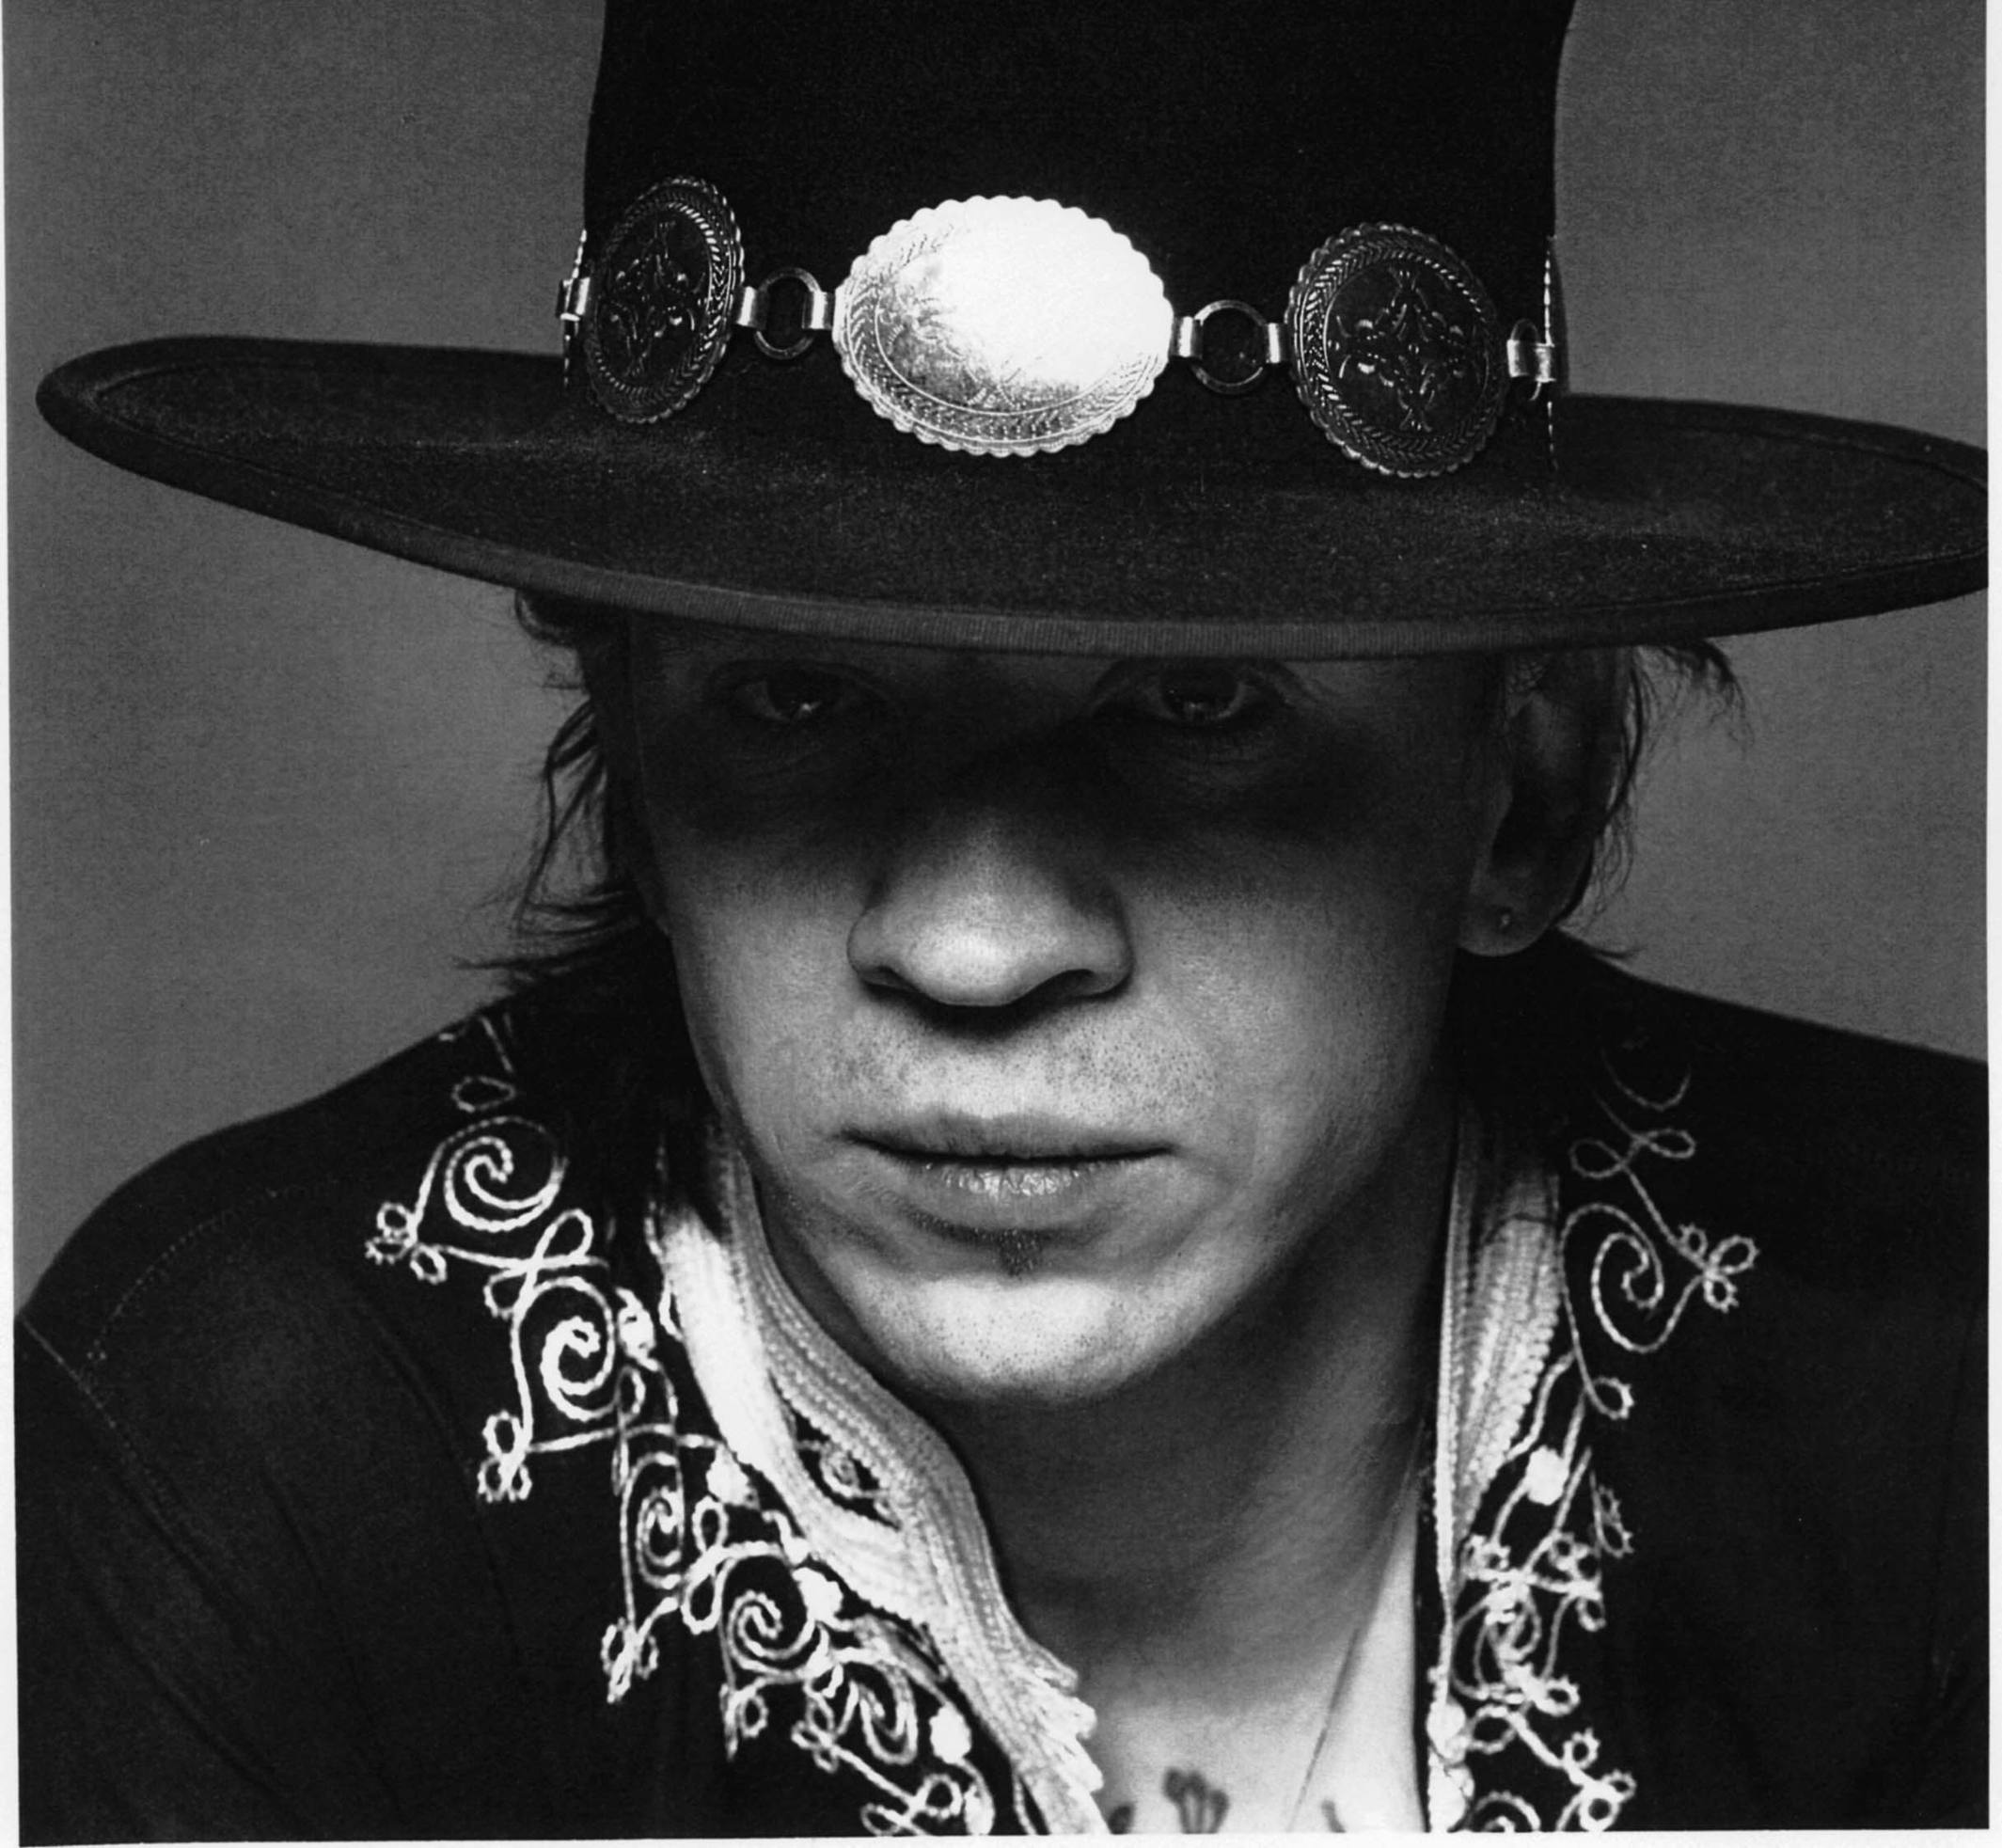 Stevie Ray Vaughan Pics, Music Collection